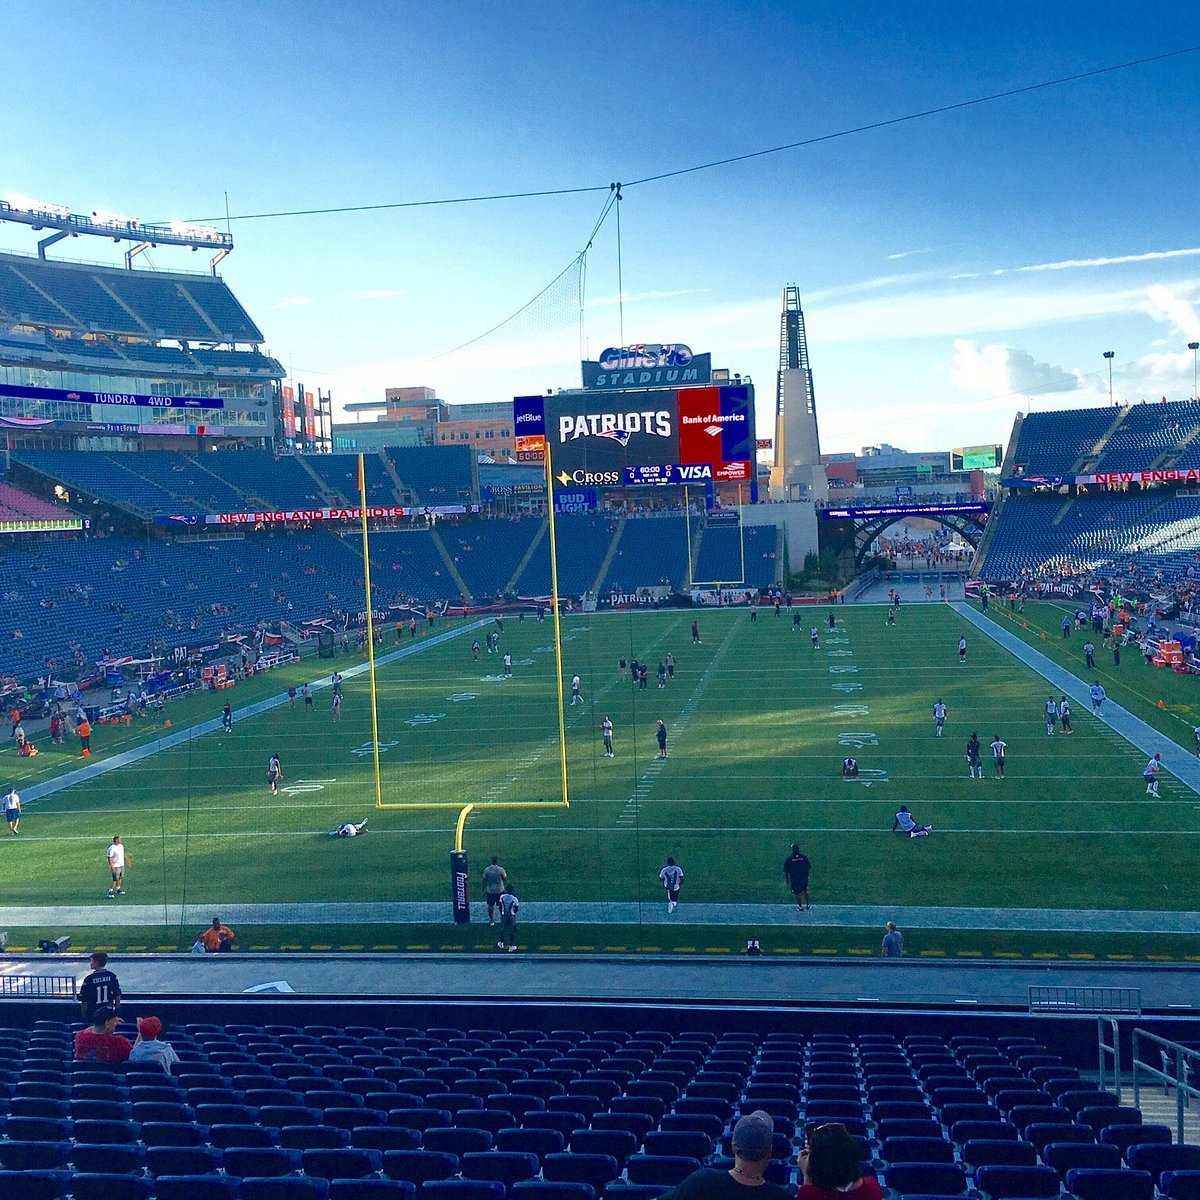 It's time for Fenway Park, TD Garden, and Gillette Stadium to go